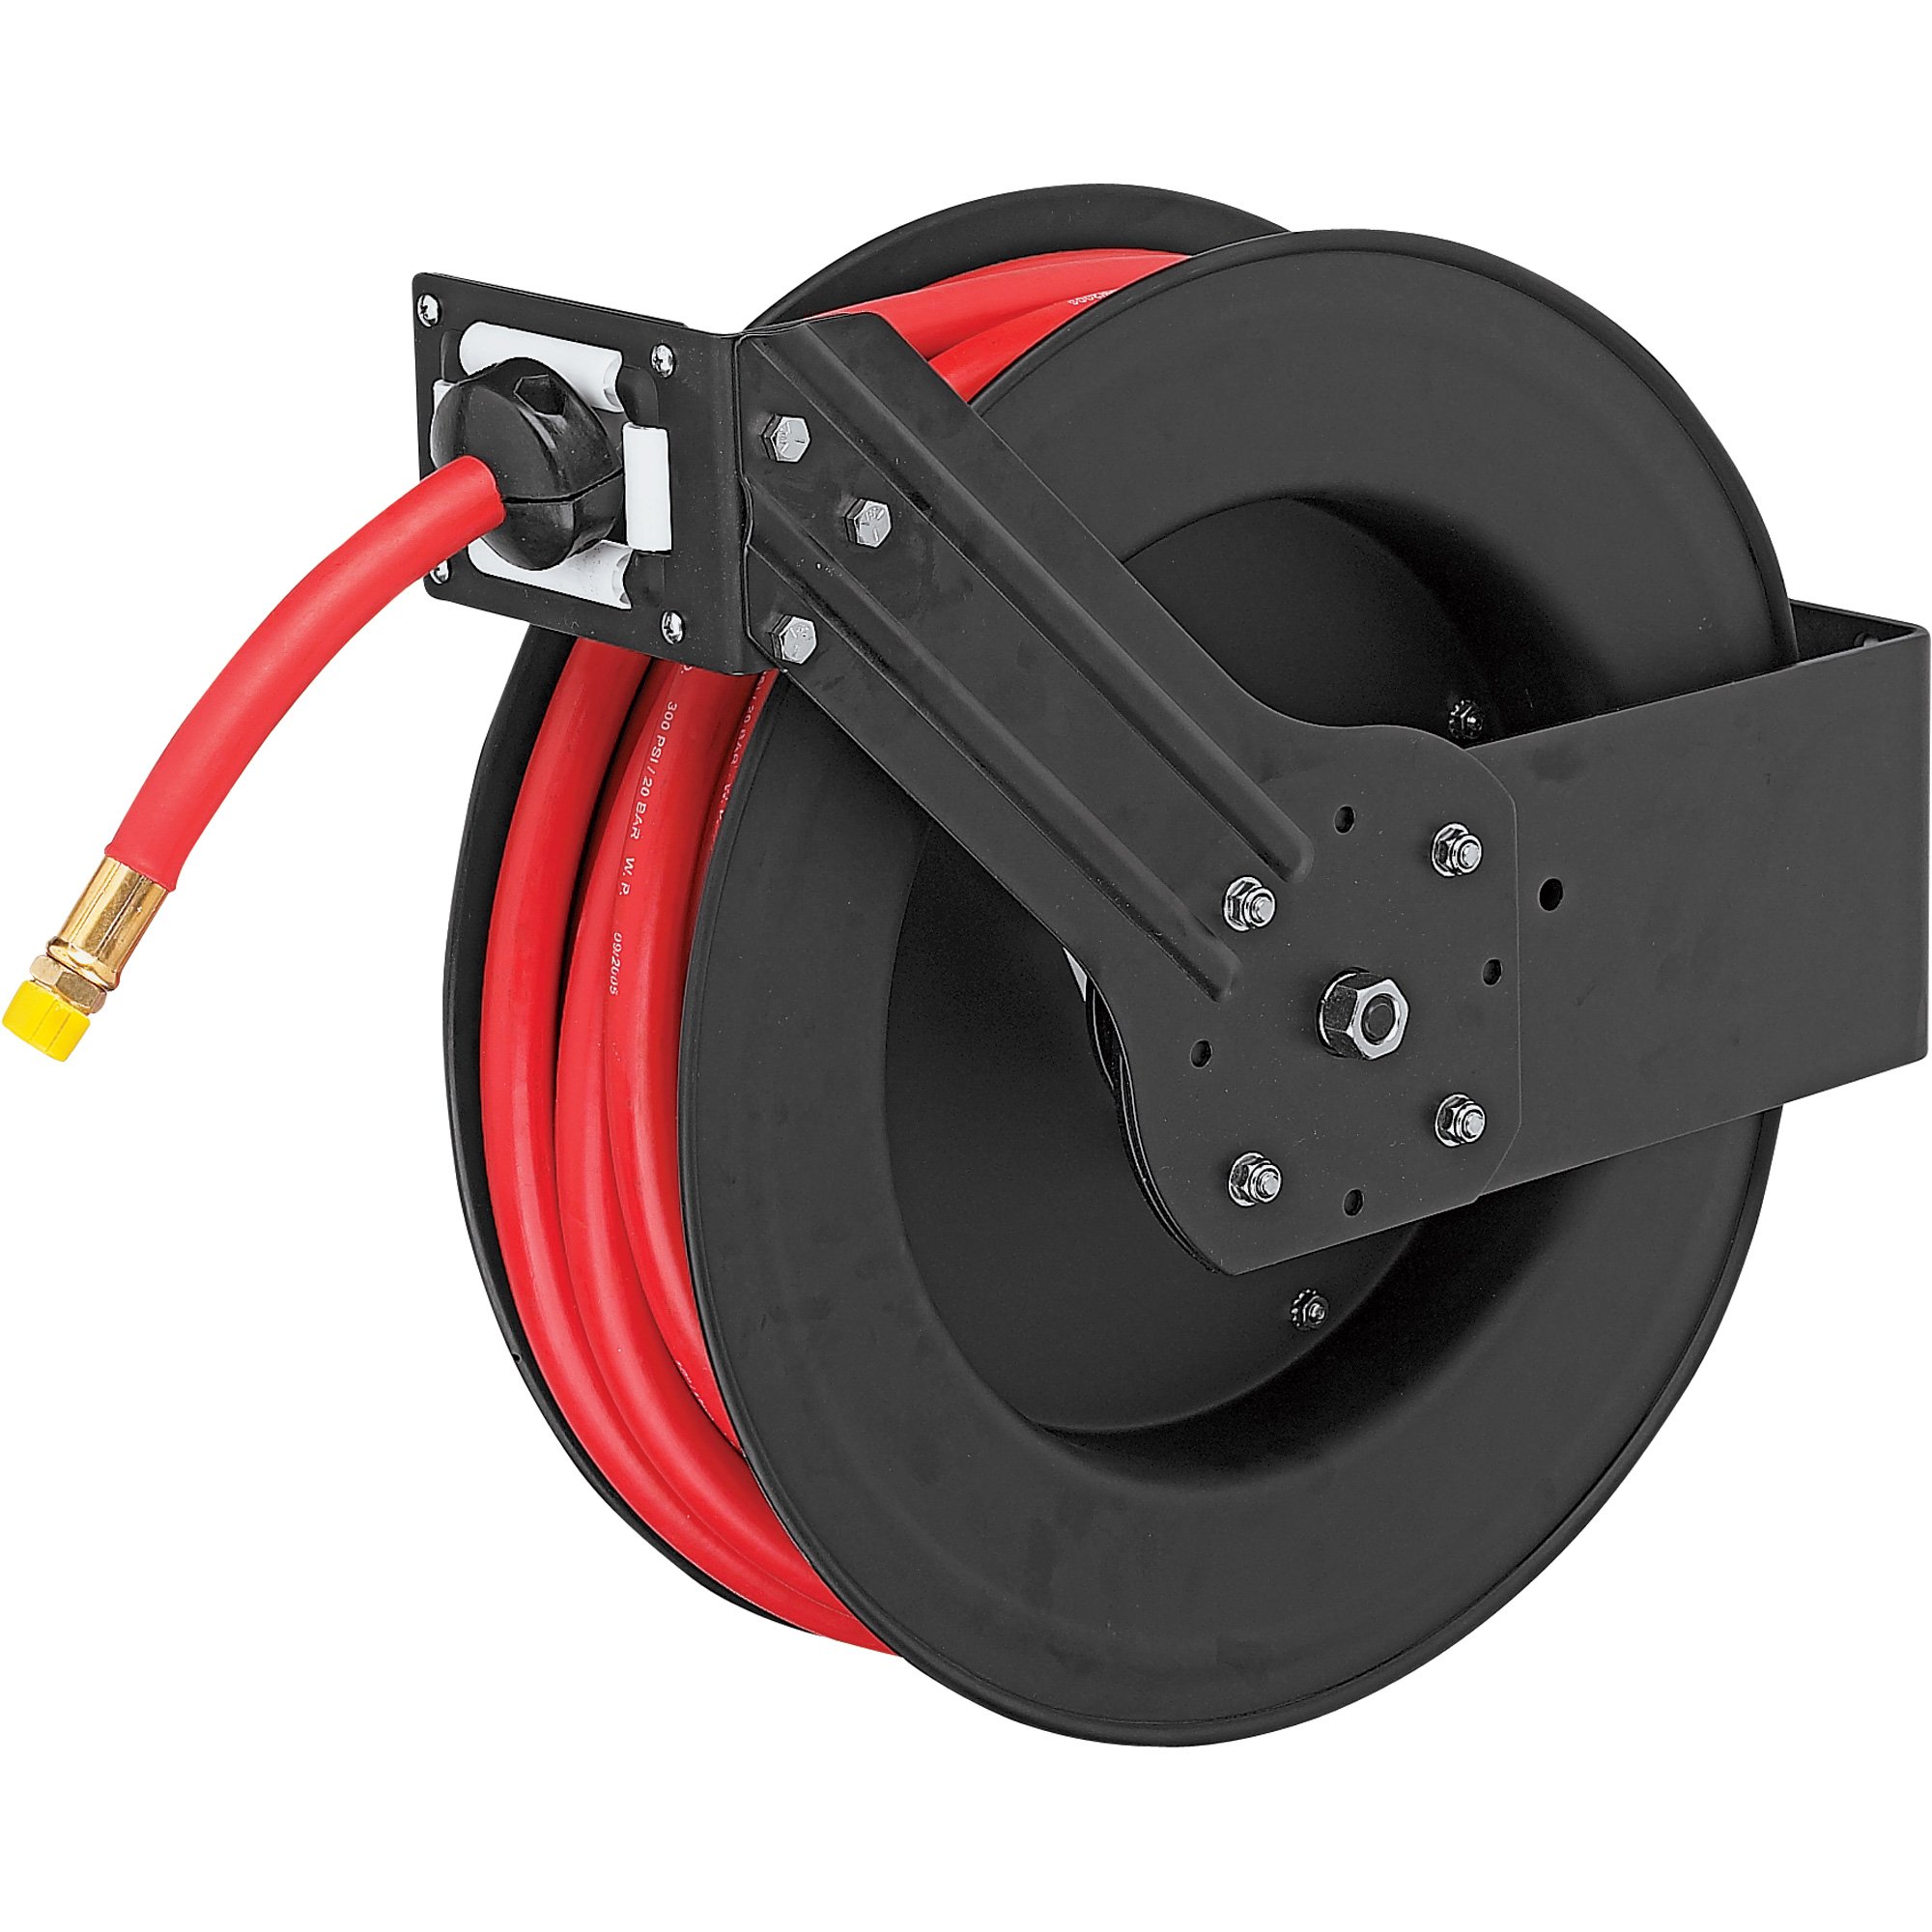 ReelWorks Auto Rewind Hose Reel — With 1/2in. x 50ft. Rubber Hose